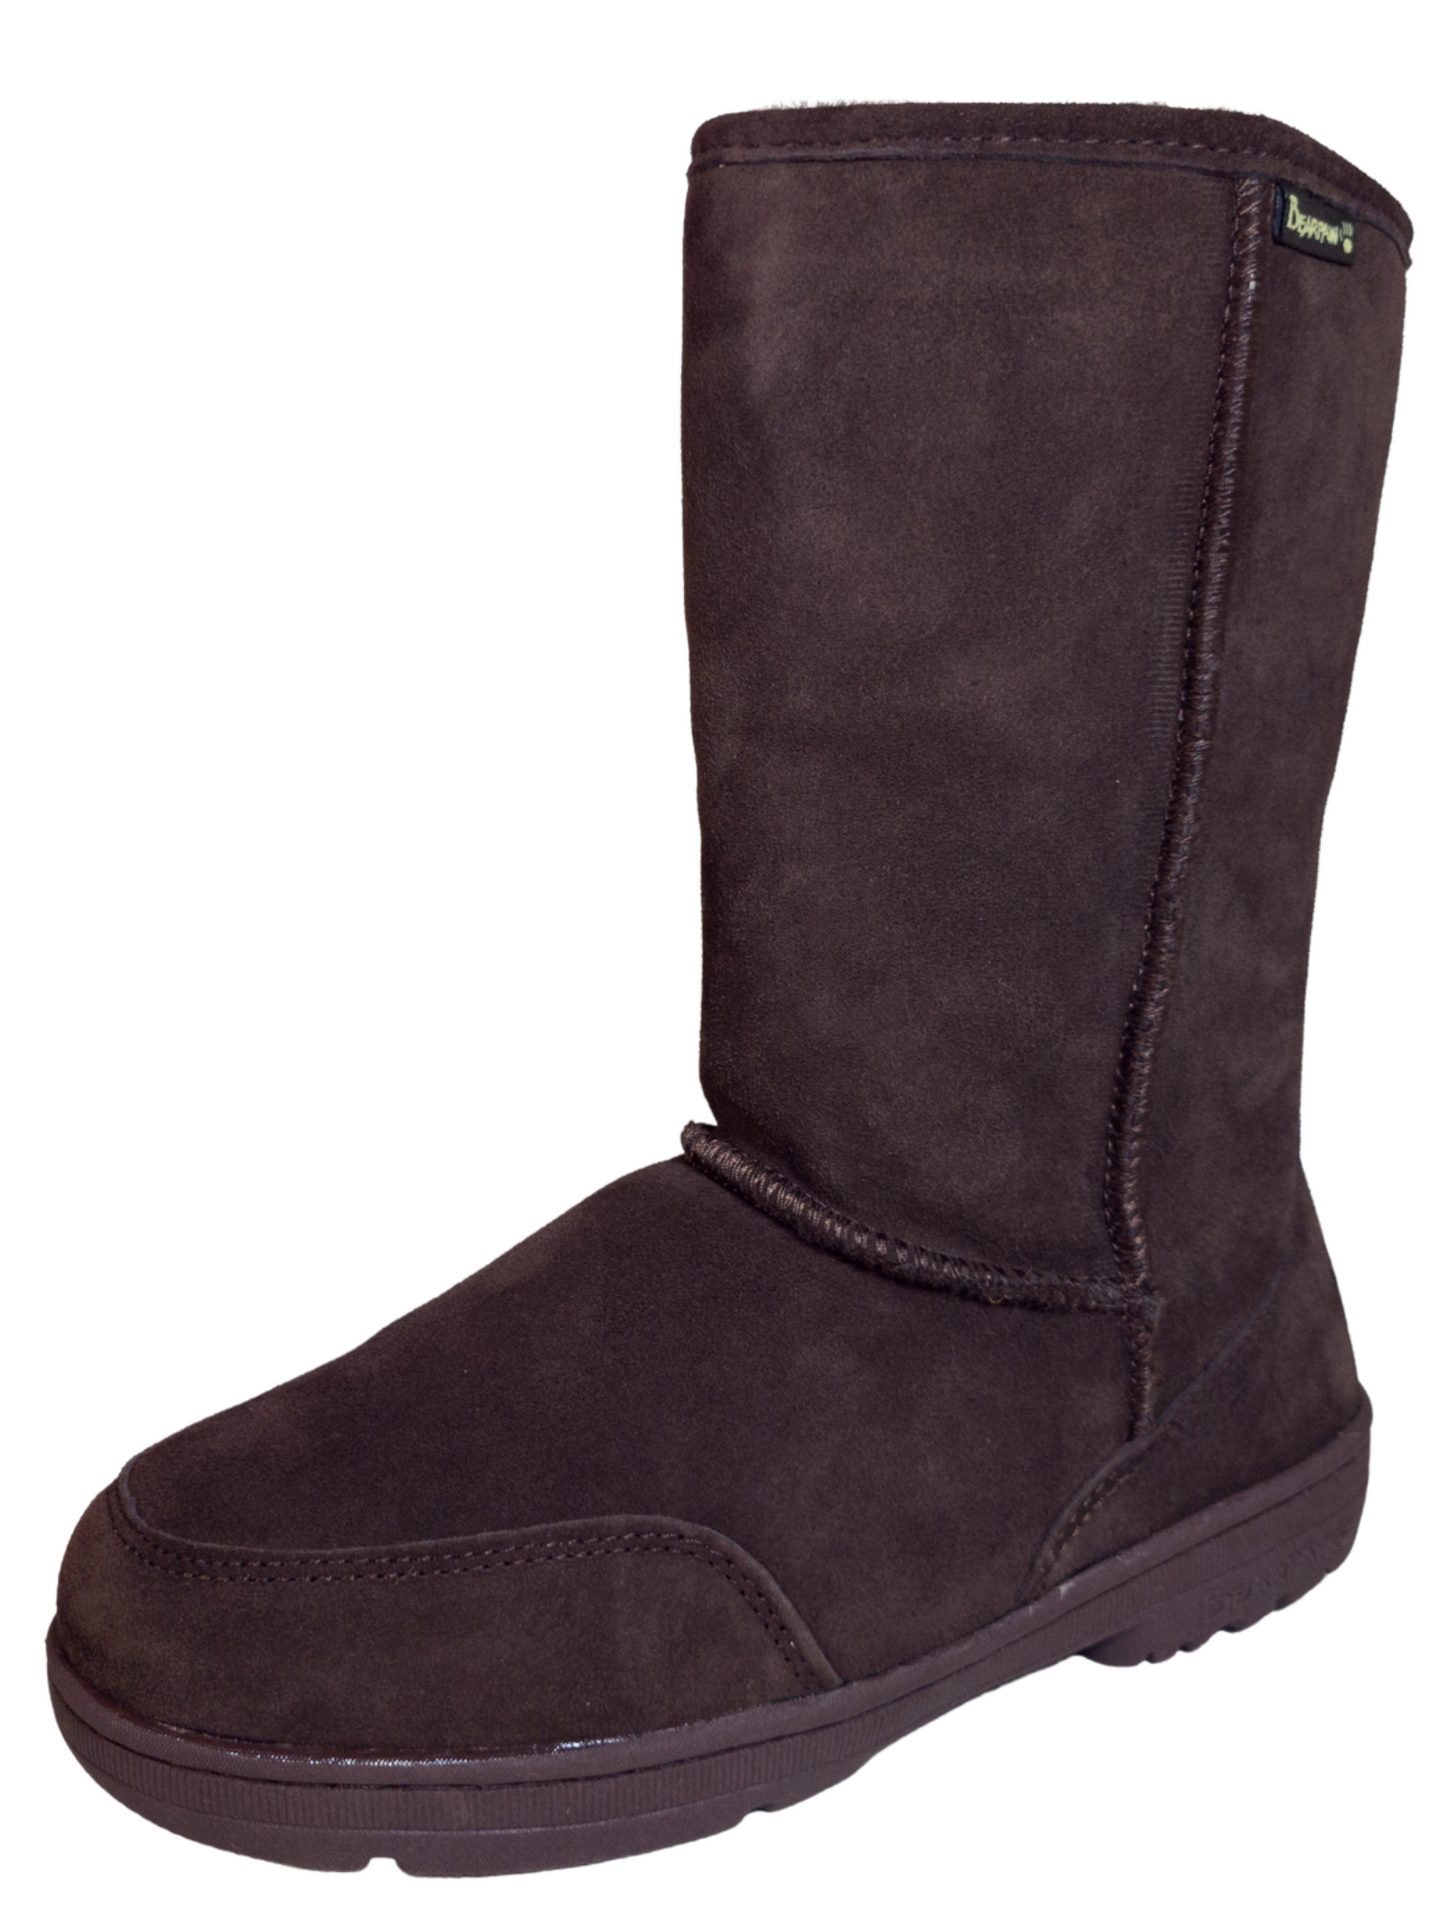 Casual Suede Leather Winter Boots for Women 'Bearpaw' - ID: 7123 Winter Boots Bearpaw Choco